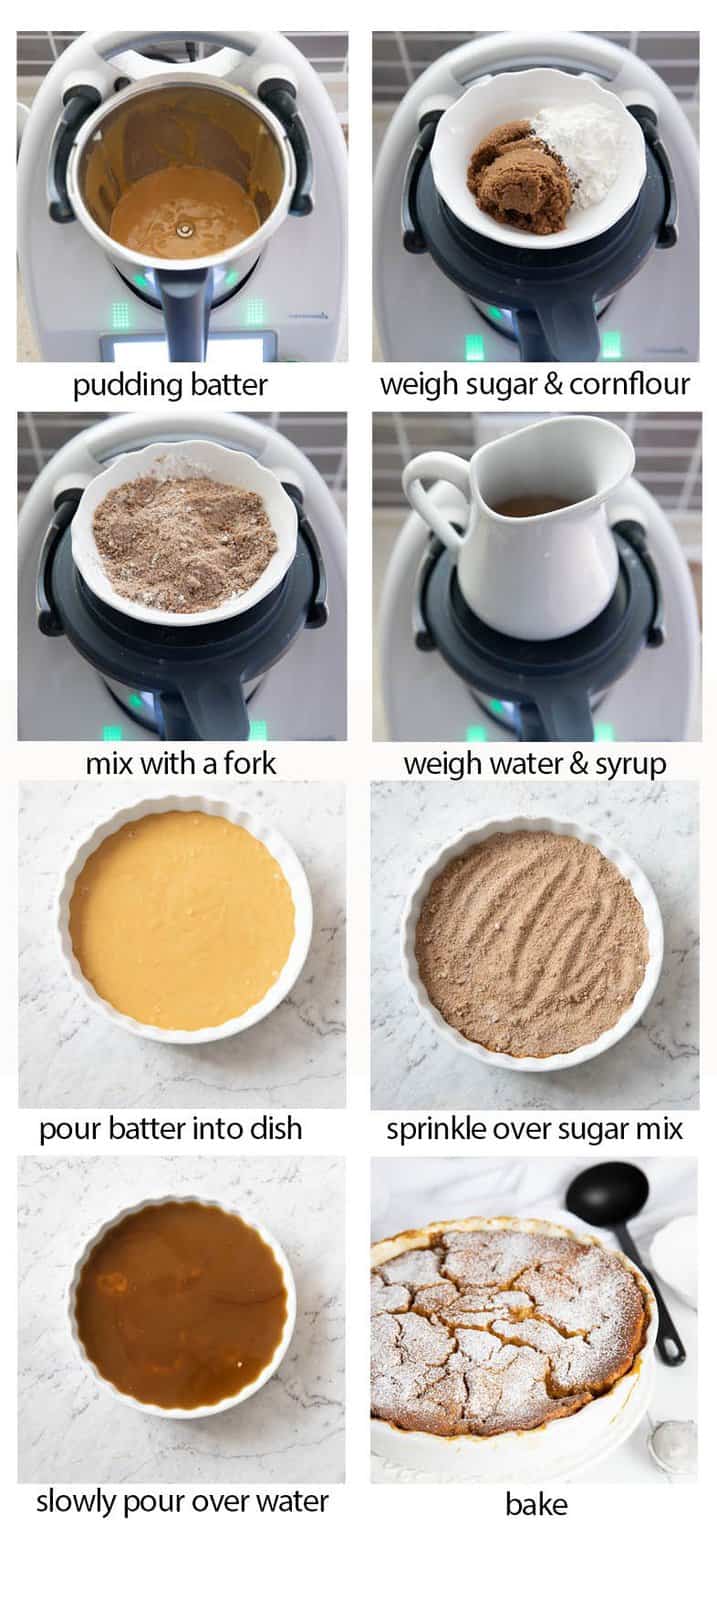 8 images showing the various steps of making a butterscotch self saucing pudding Thermomix.